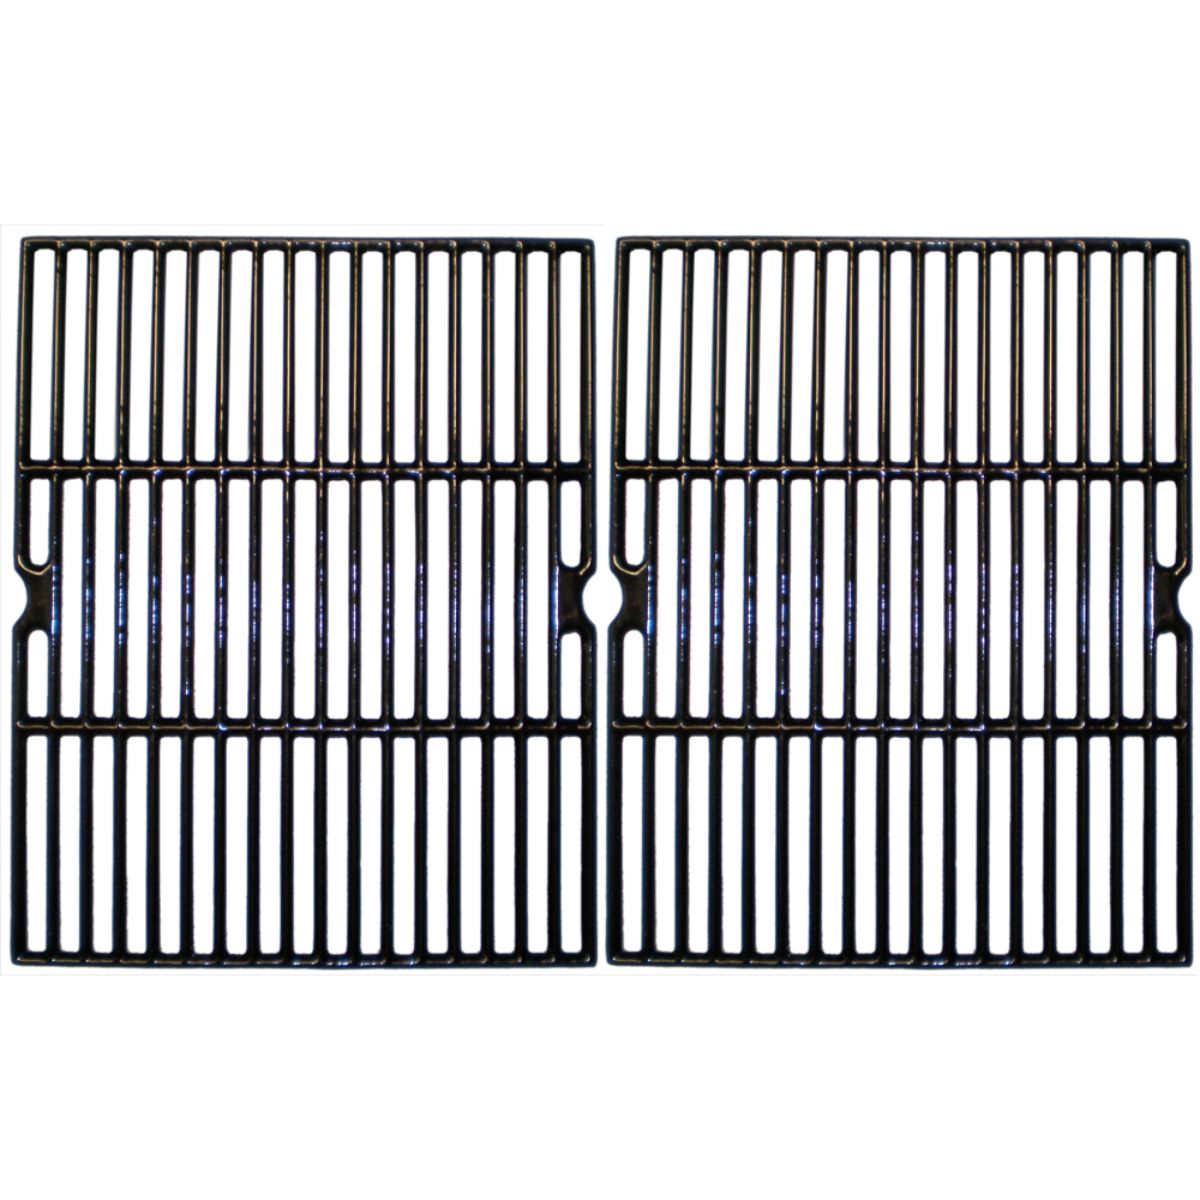 Gloss cast iron cooking grid for Ducane, Grill Chef, Uniflame brand gas grills